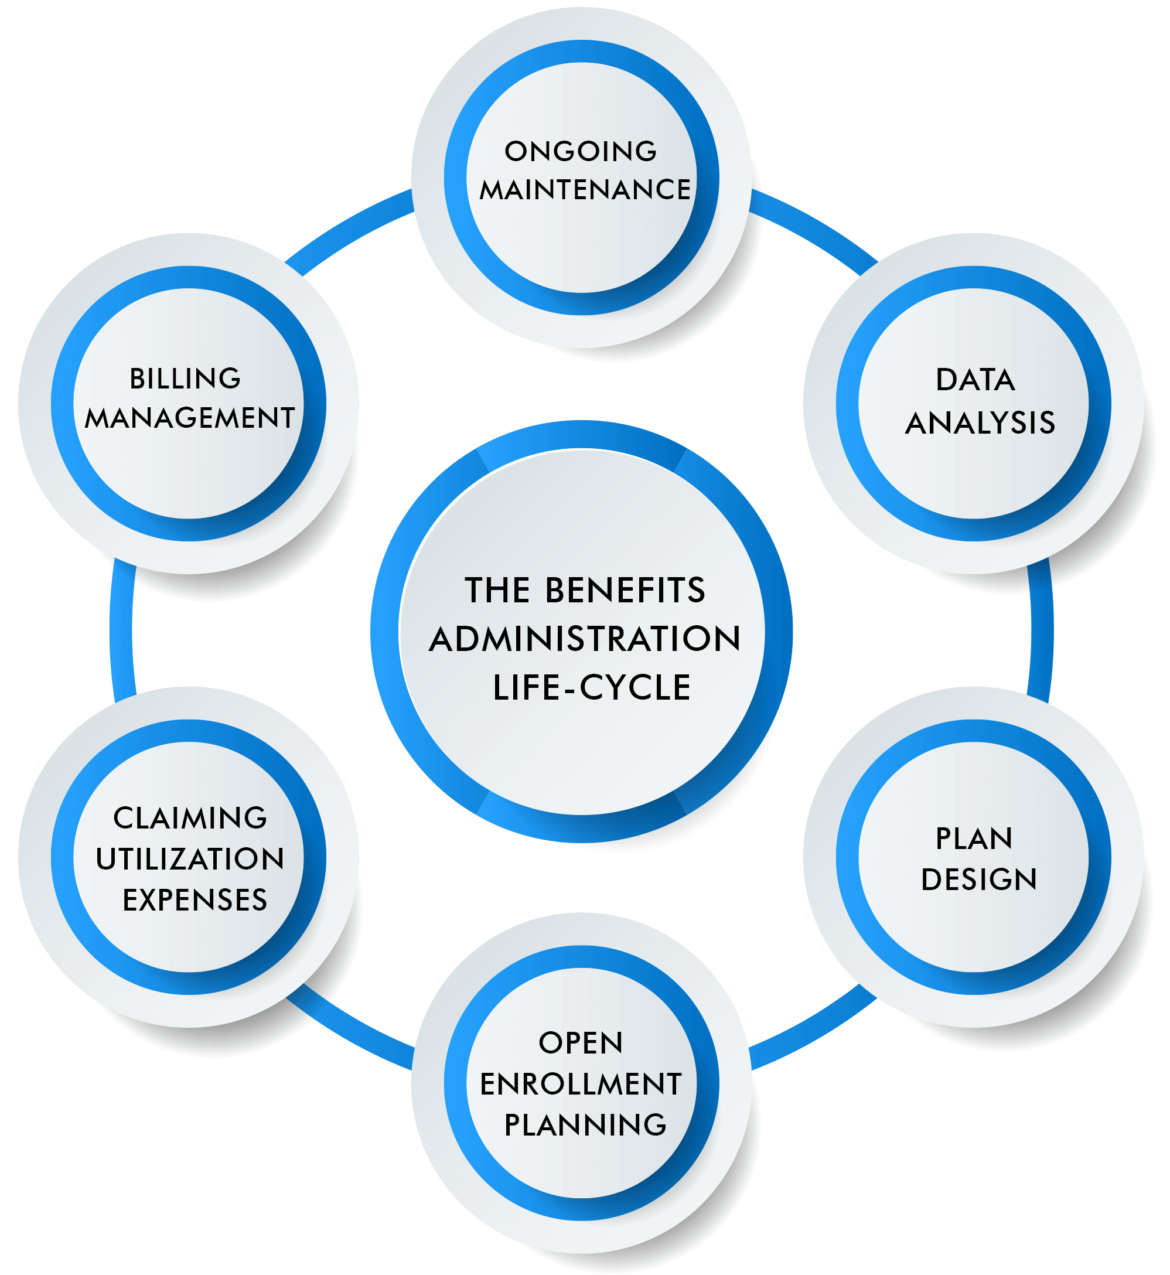 What Is Employee Benefits Administration?